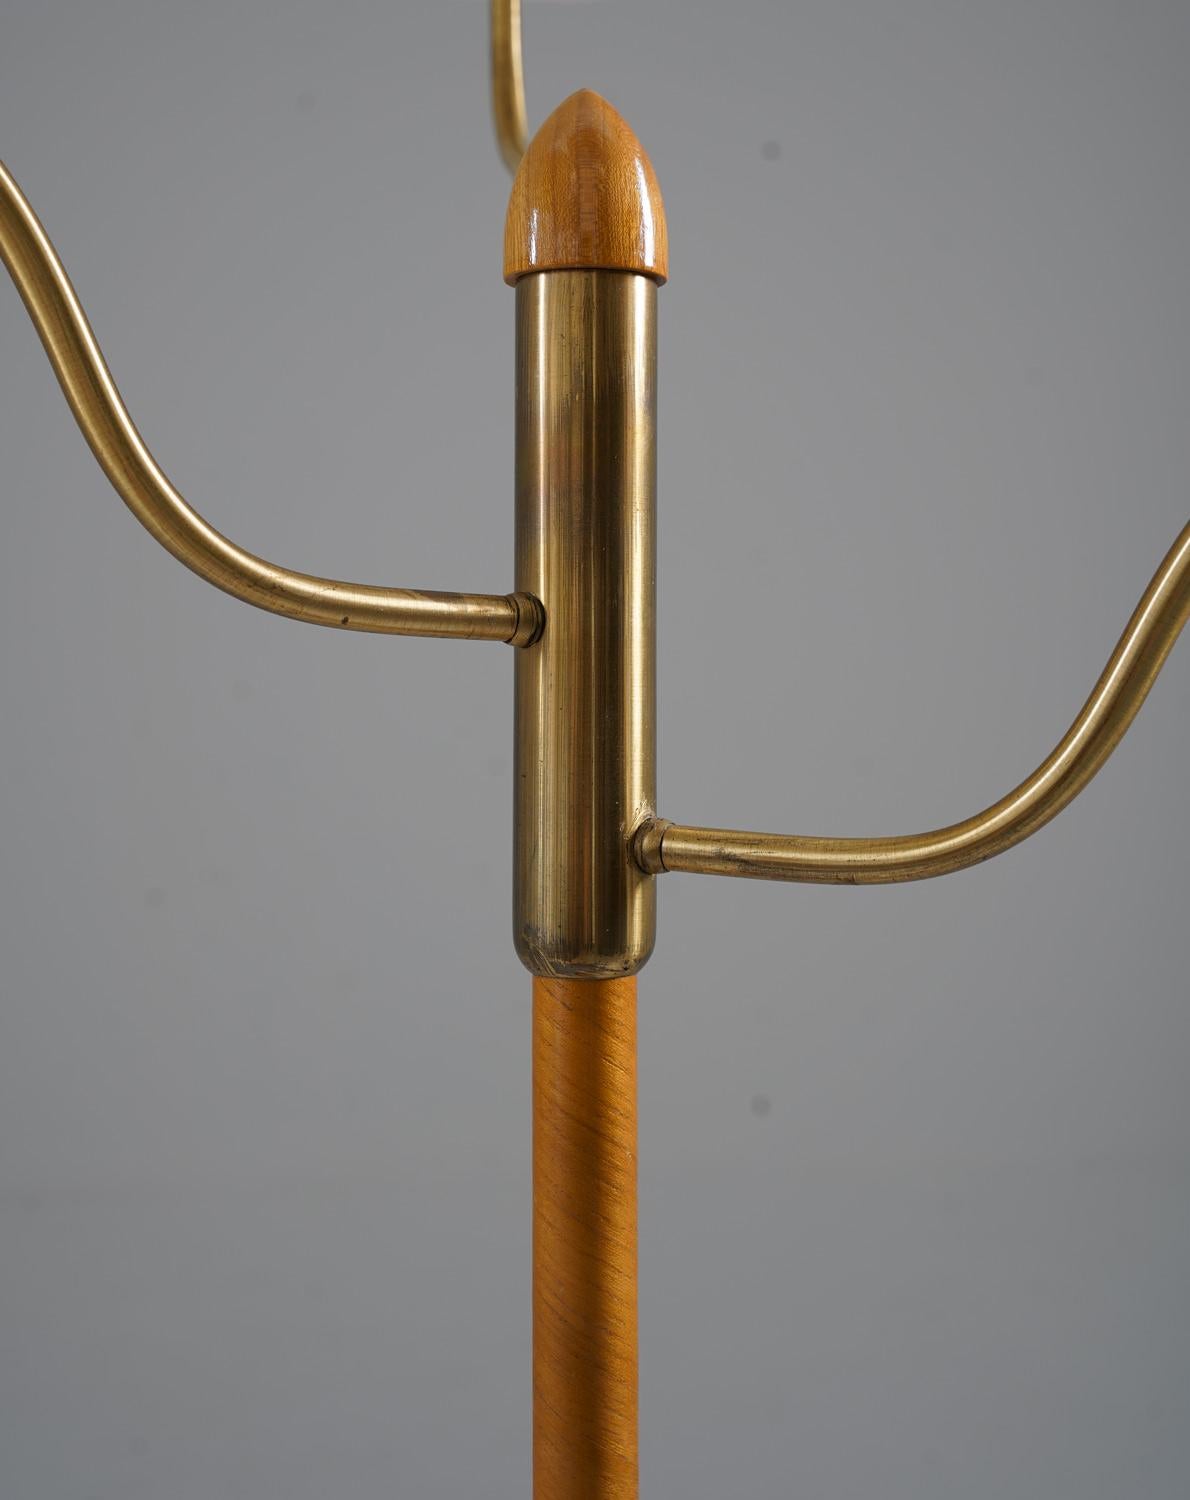 20th Century Swedish Modern Floor Lamp in Brass and Leather